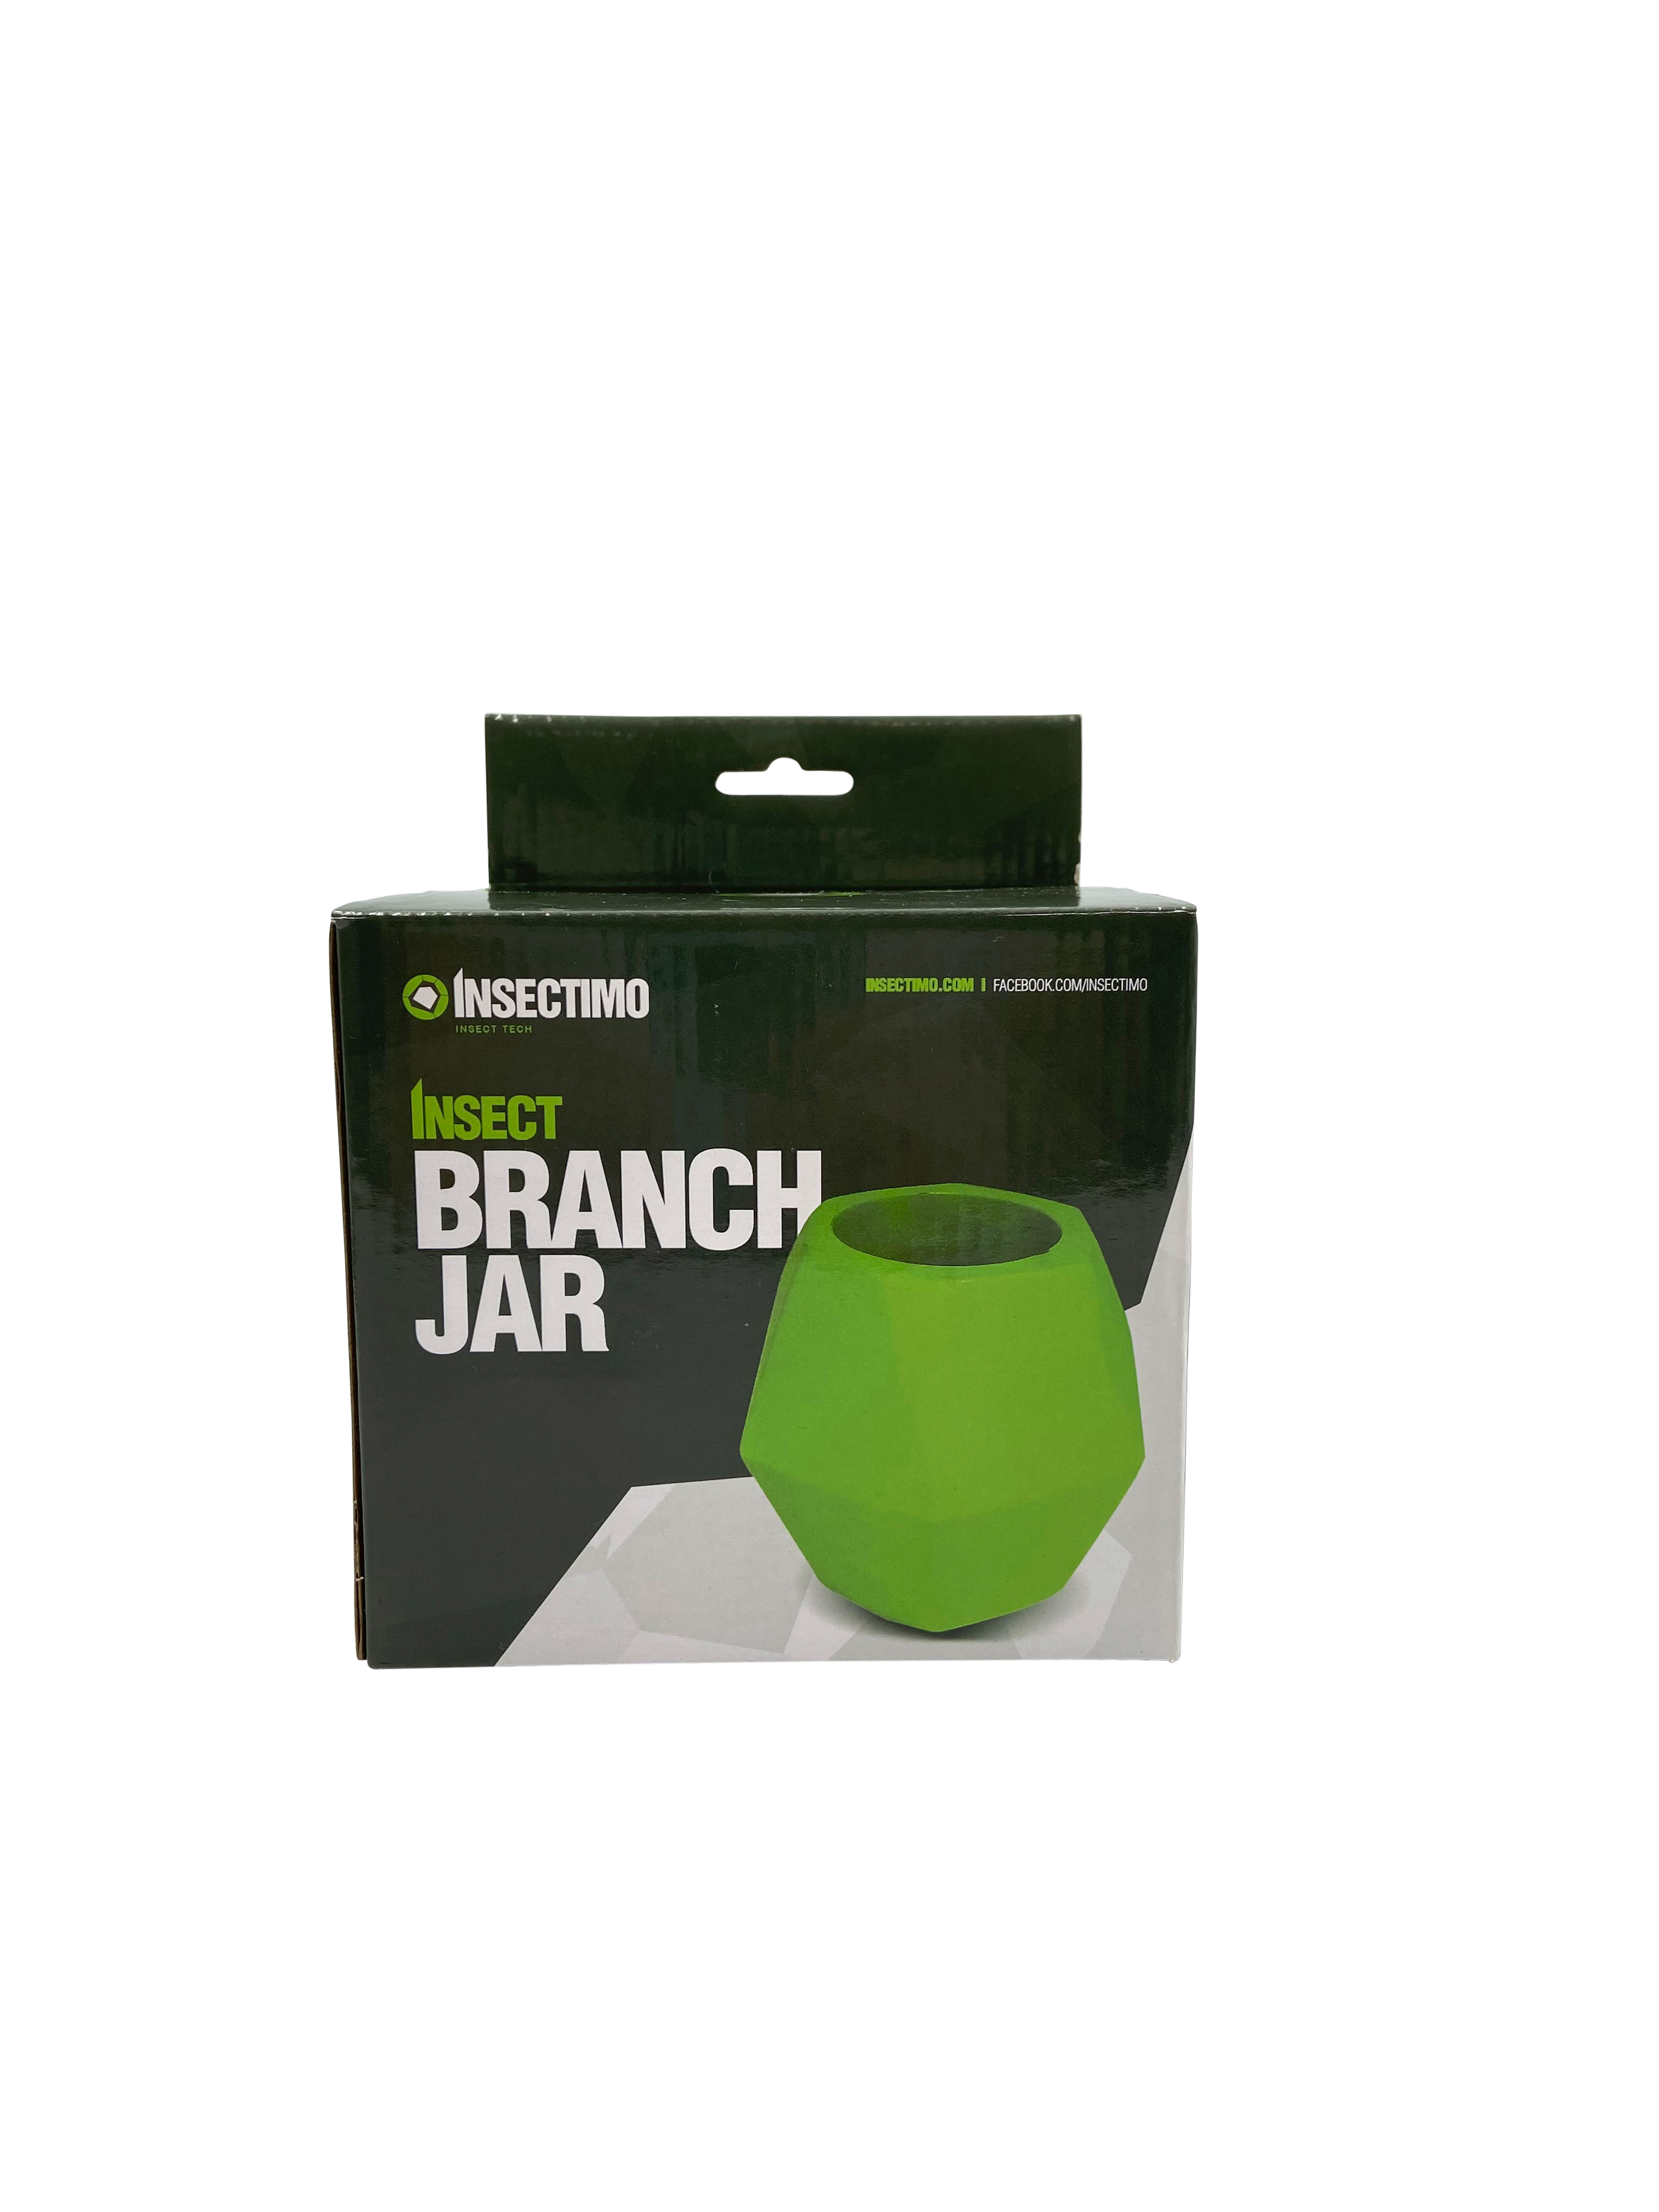 Insectimo Branch Jar